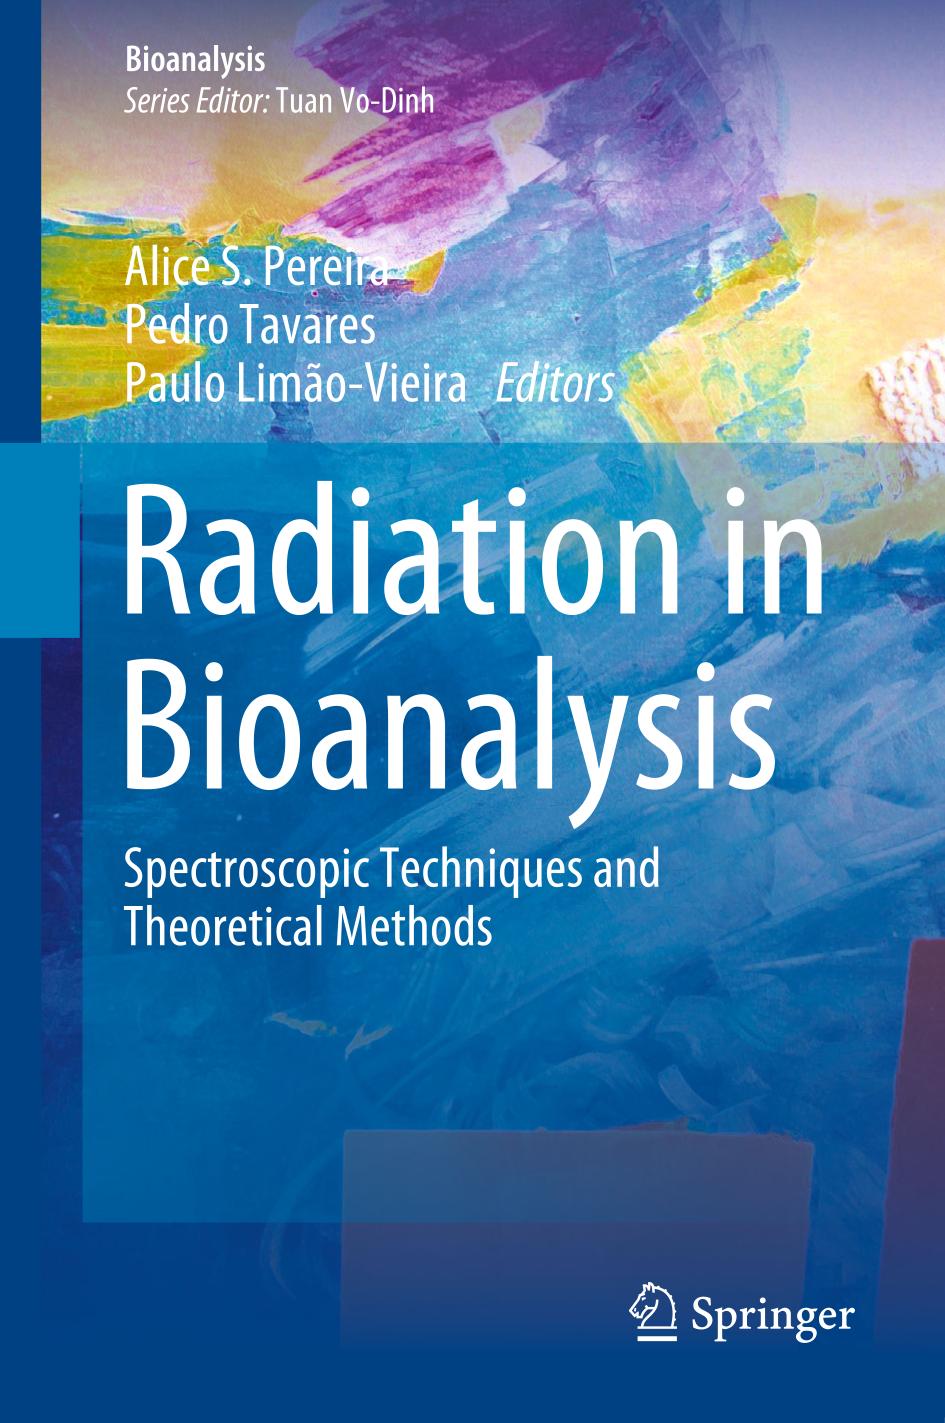 Radiation in bioanalysis : spectroscopic techniques and theoretical methods